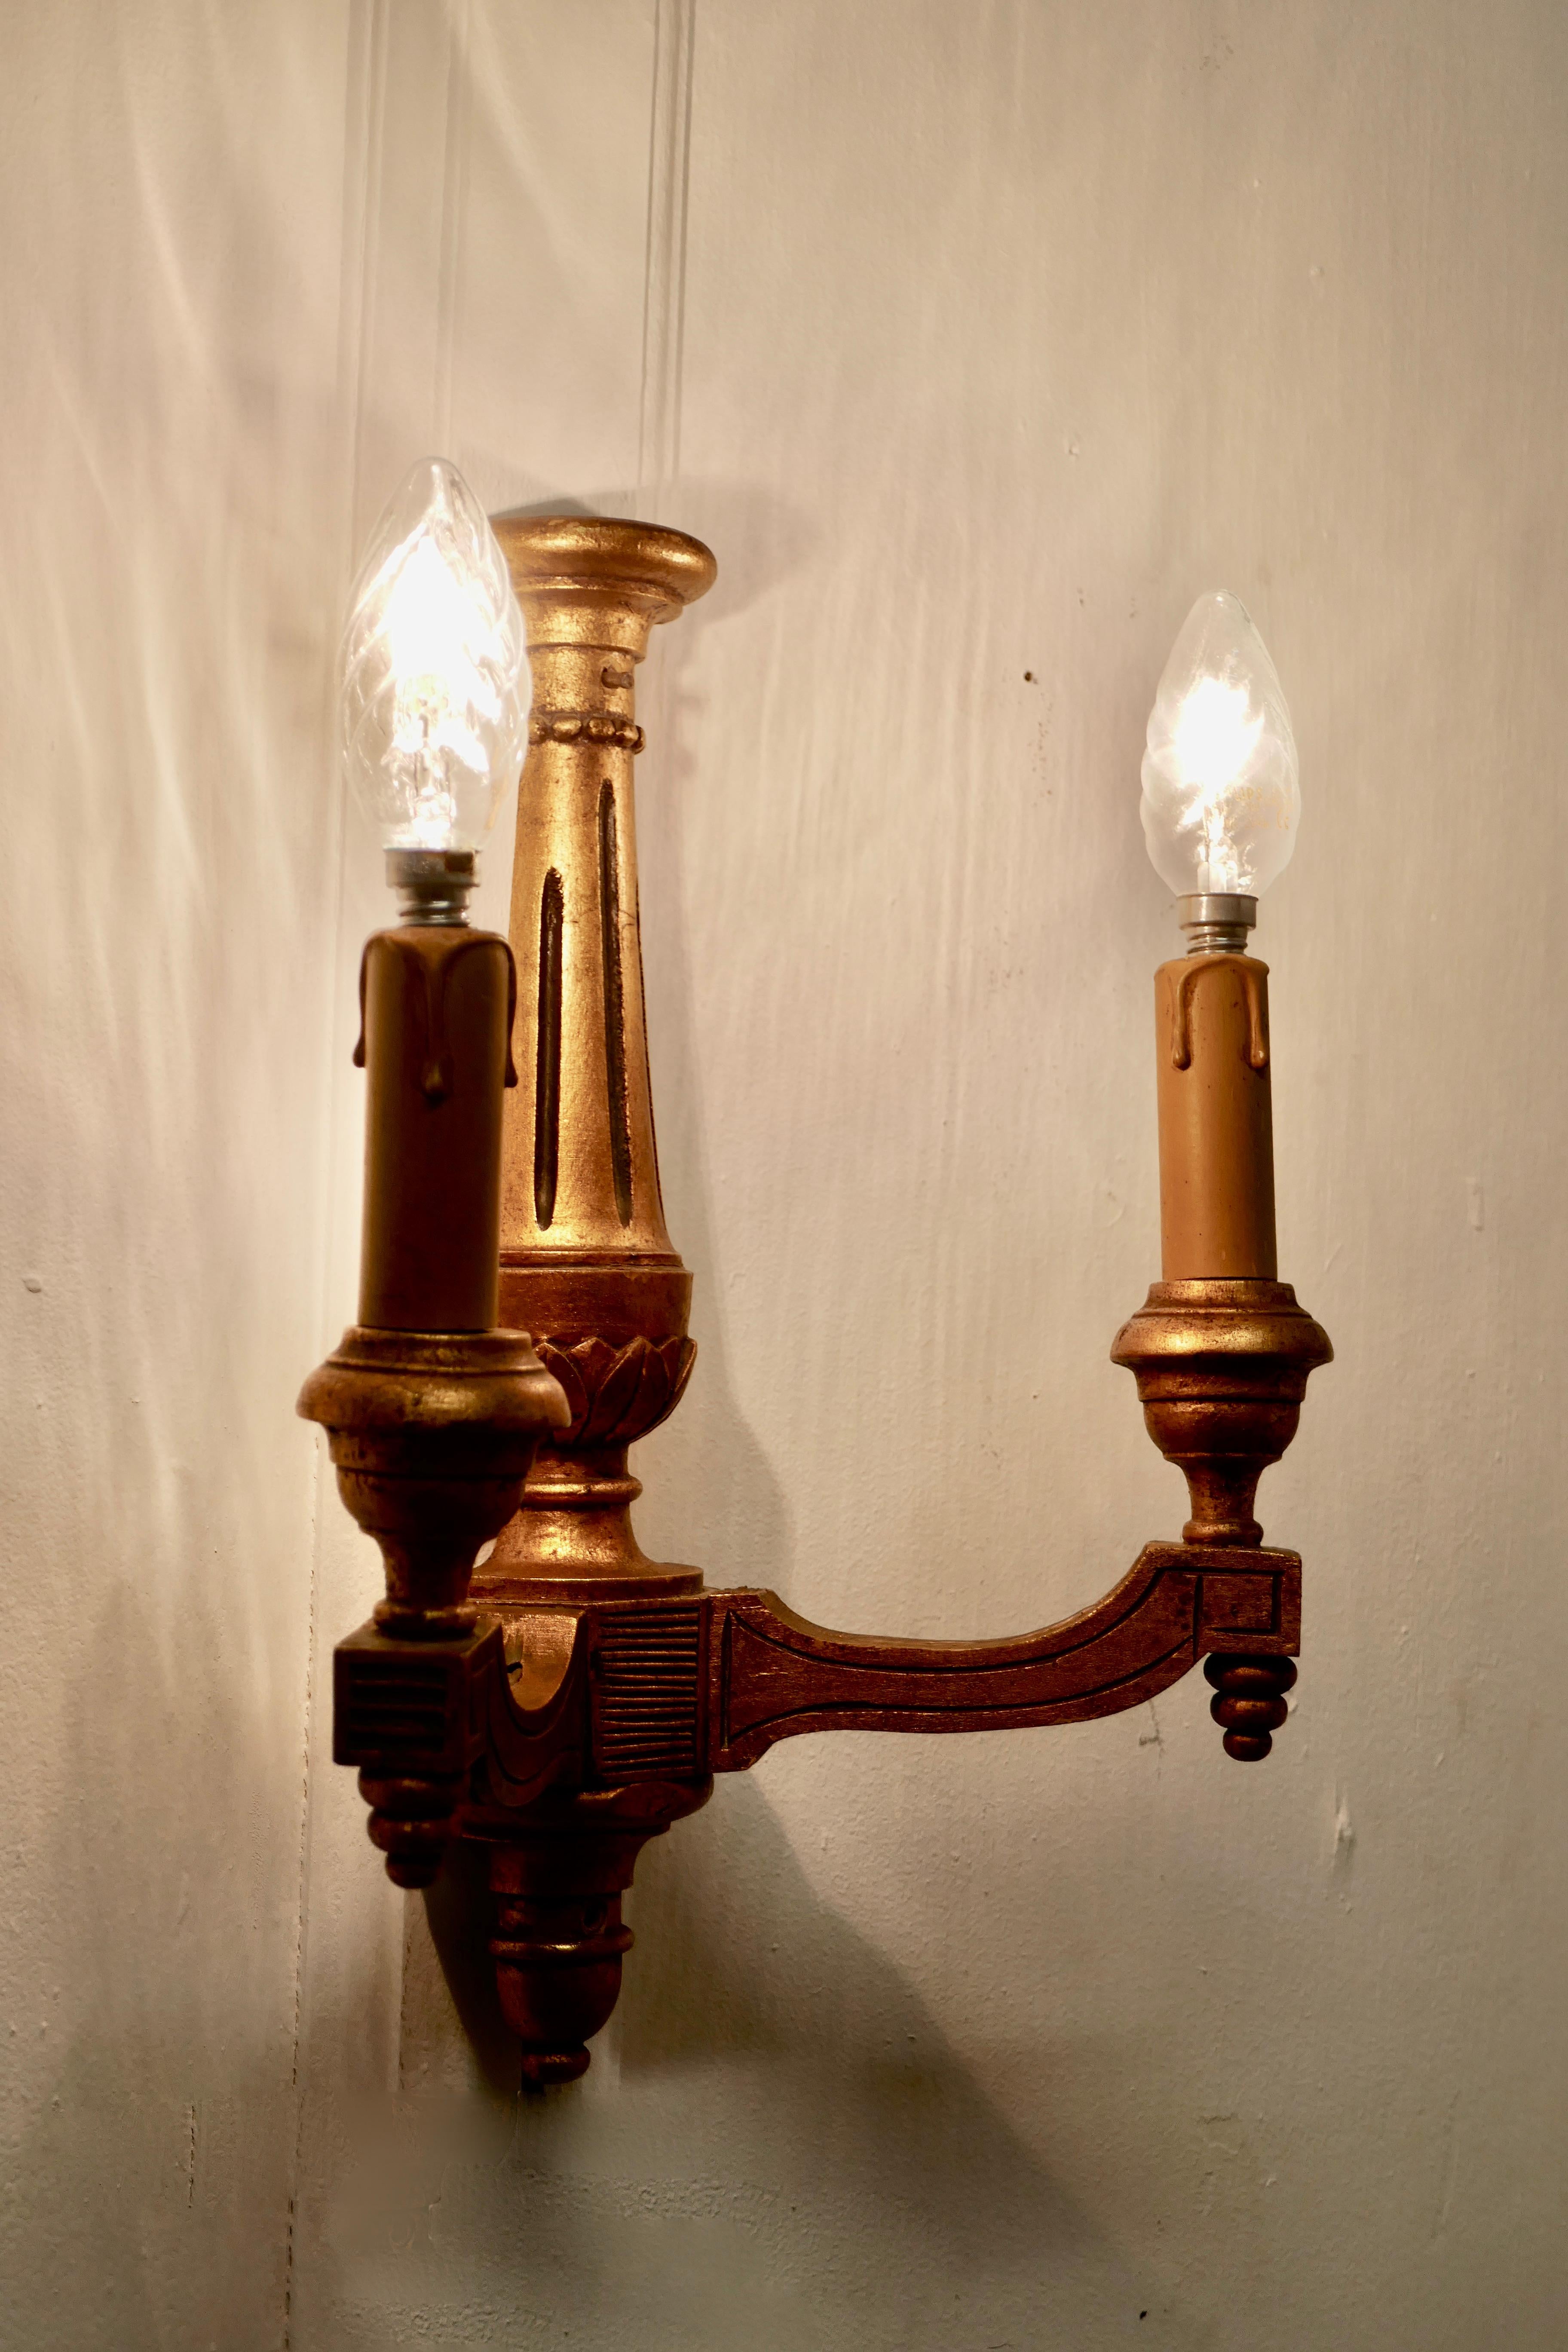 Regency style giltwood carved TwinWall light


This is a very attractive light it has regency look with dark stripes in the column, it has 2 sconces 

The light is in good vintage condition and is working, however it will have to be installed